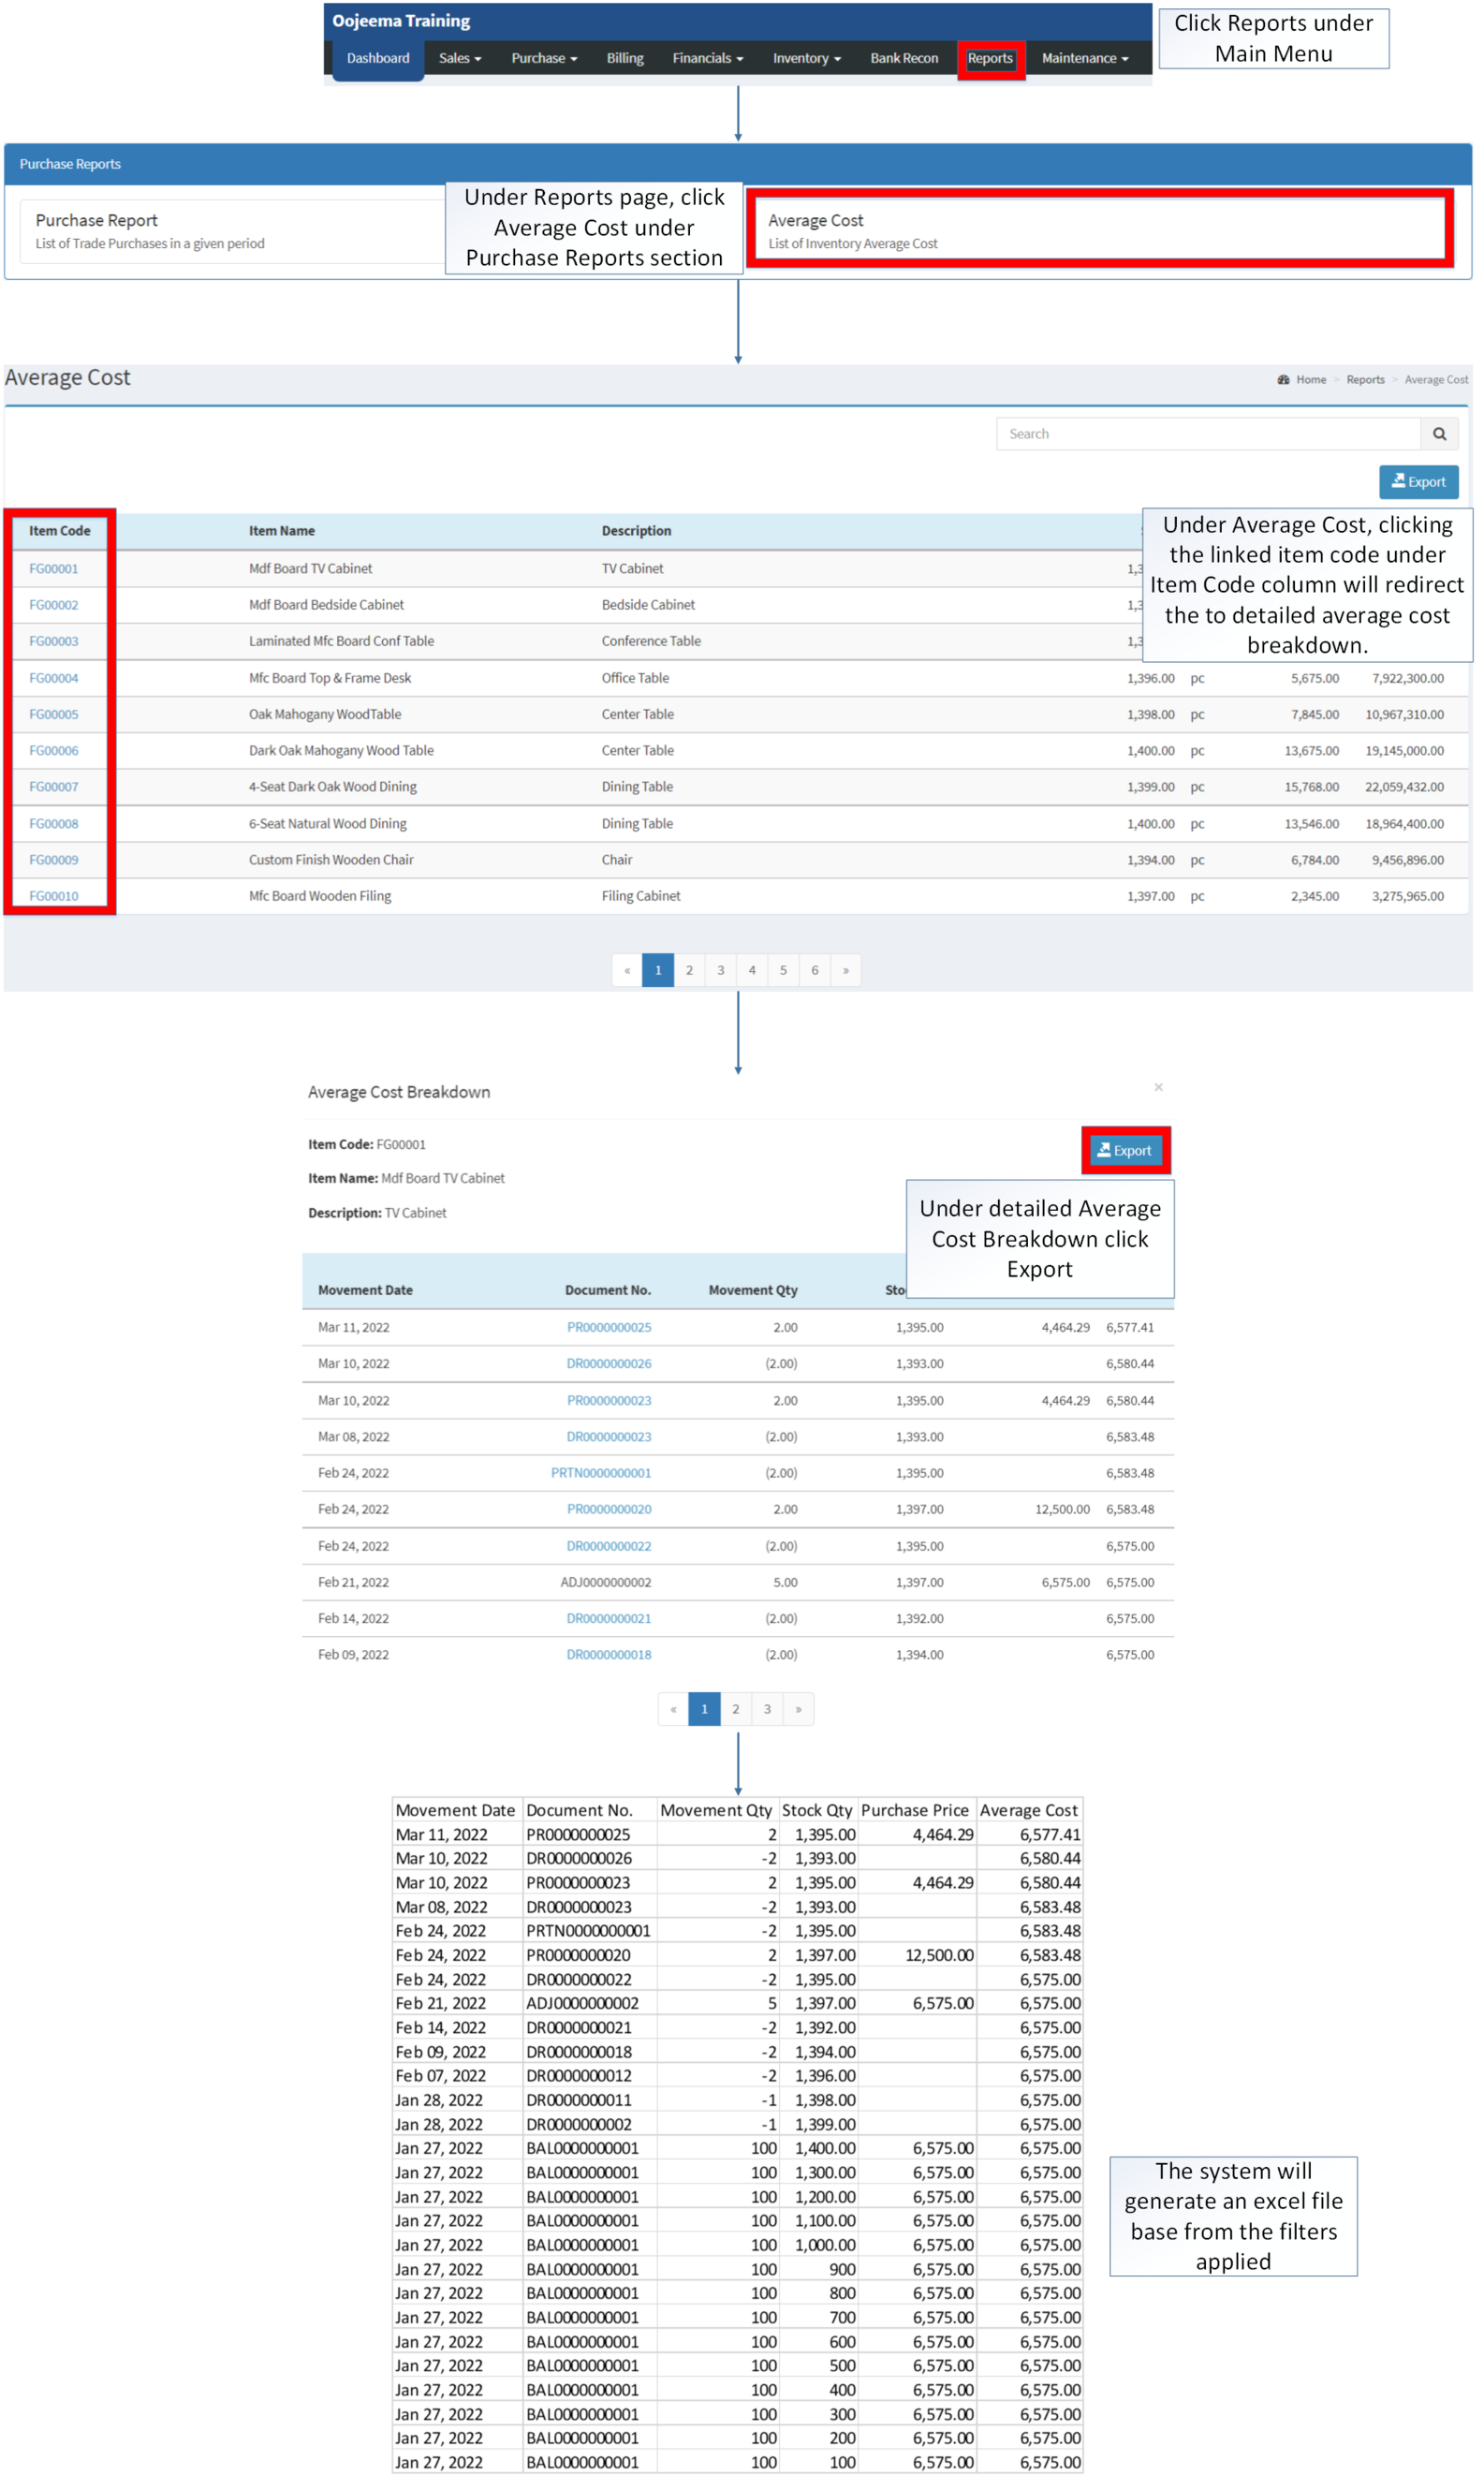 Purchase Reports - Average Cost - Export Detailed.png